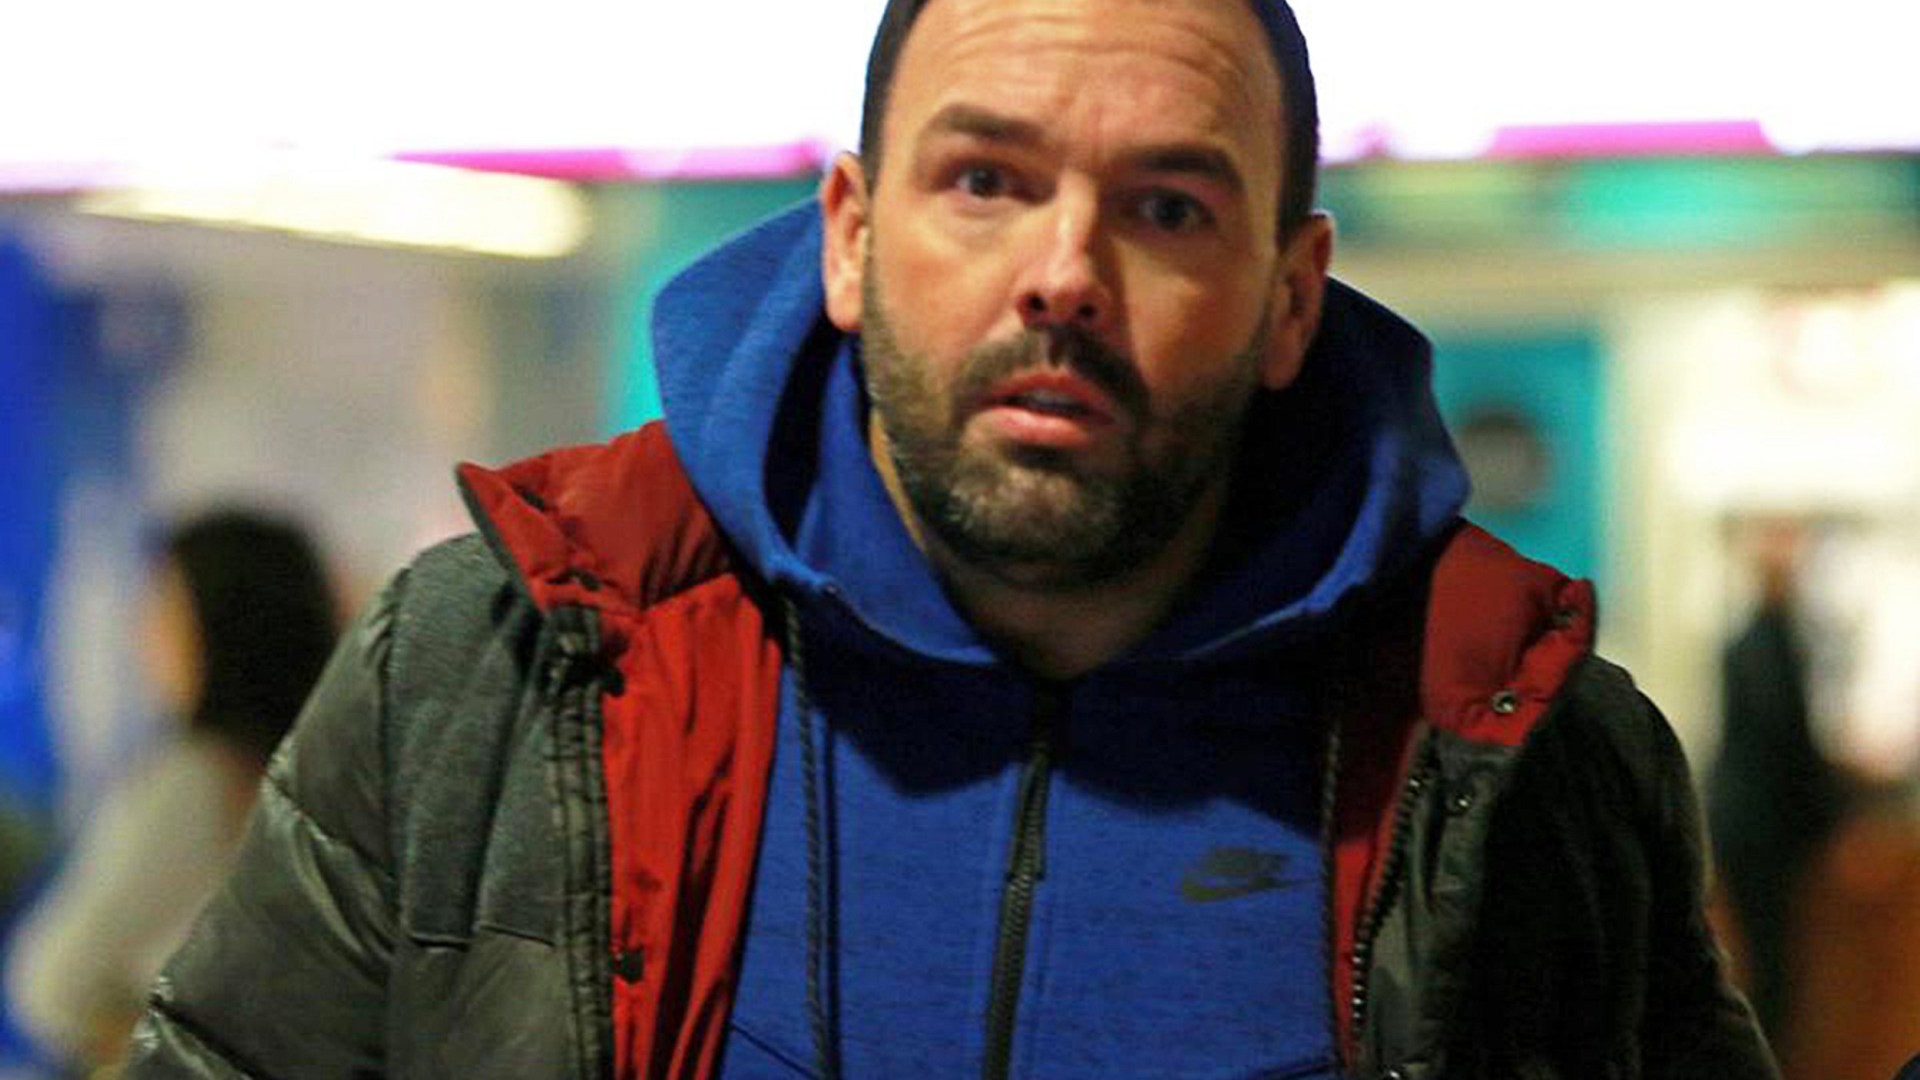 Daniel Kinahan’s expected return date to Ireland to face justice revealed as extradition deal held up over complexities [Video]